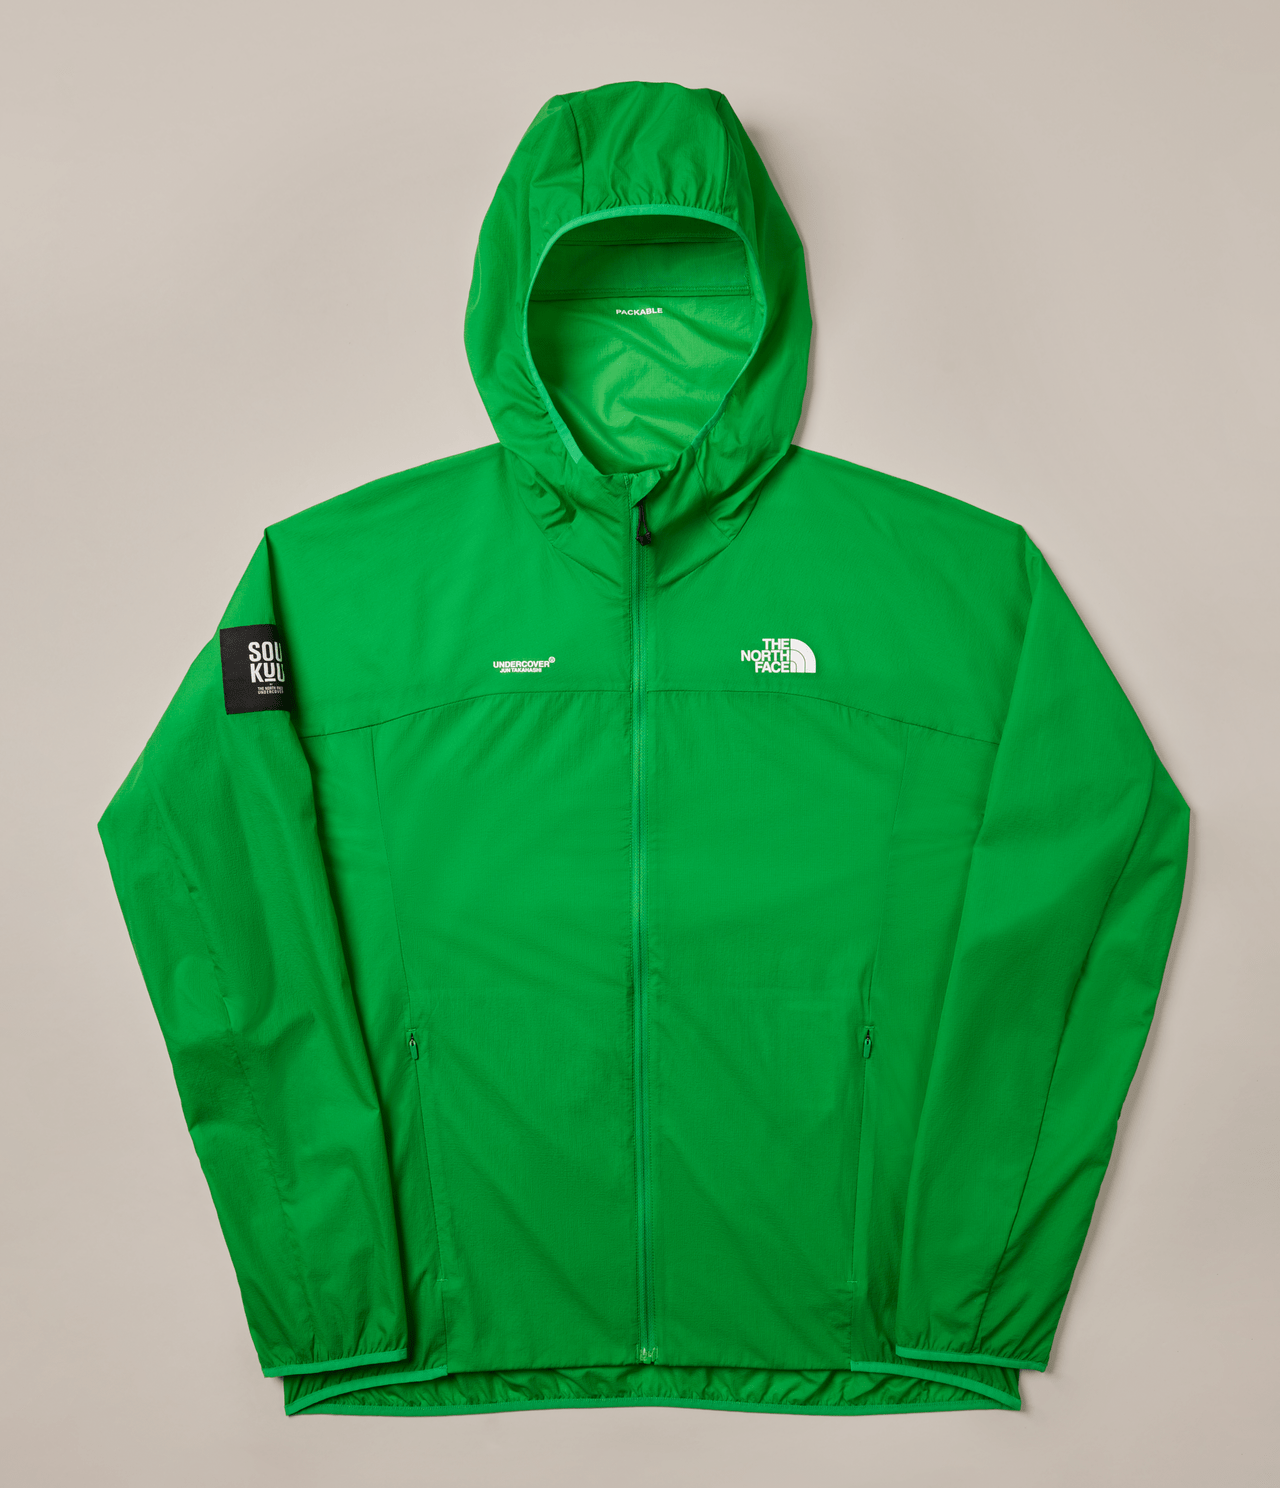 THE NORTH FACE ザ・ノース・フェイス UNDERCOVER アンダーカバー コラボ THE NORTH FACE × UNDERCOVER Trail Run Packable Wind Jacket (ザ・ノース・フェイス x アンダーカバー トレイルラン・パッカブル・ウインドジャケット) グリーン１